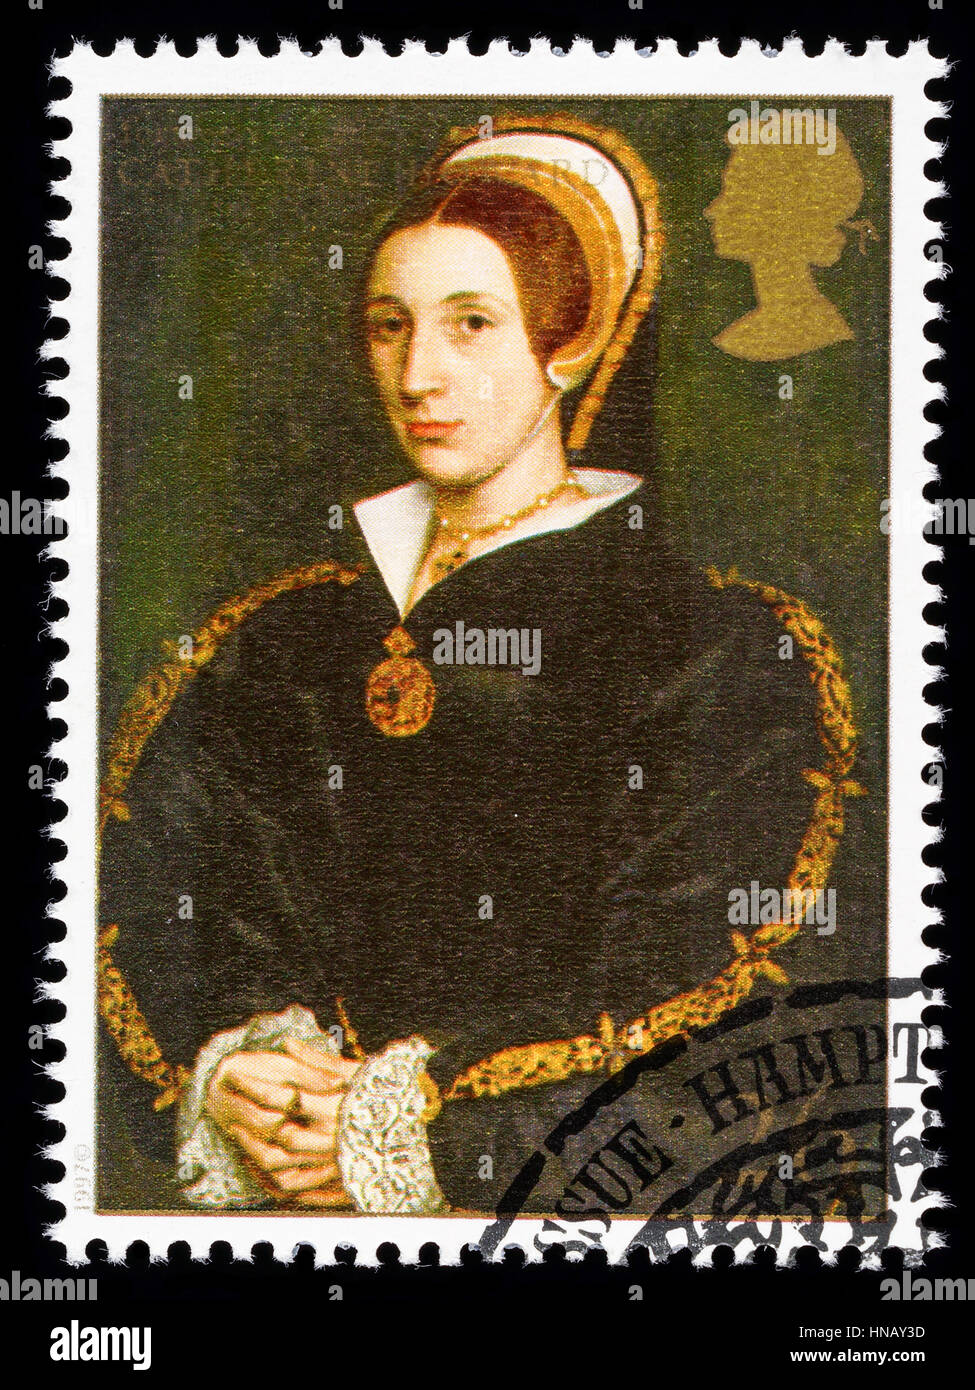 UNITED KINGDOM - CIRCA 1997: used postage stamp printed in Britain commemorating King Henry 8th showing Catherine Howard one of his many Wives Stock Photo